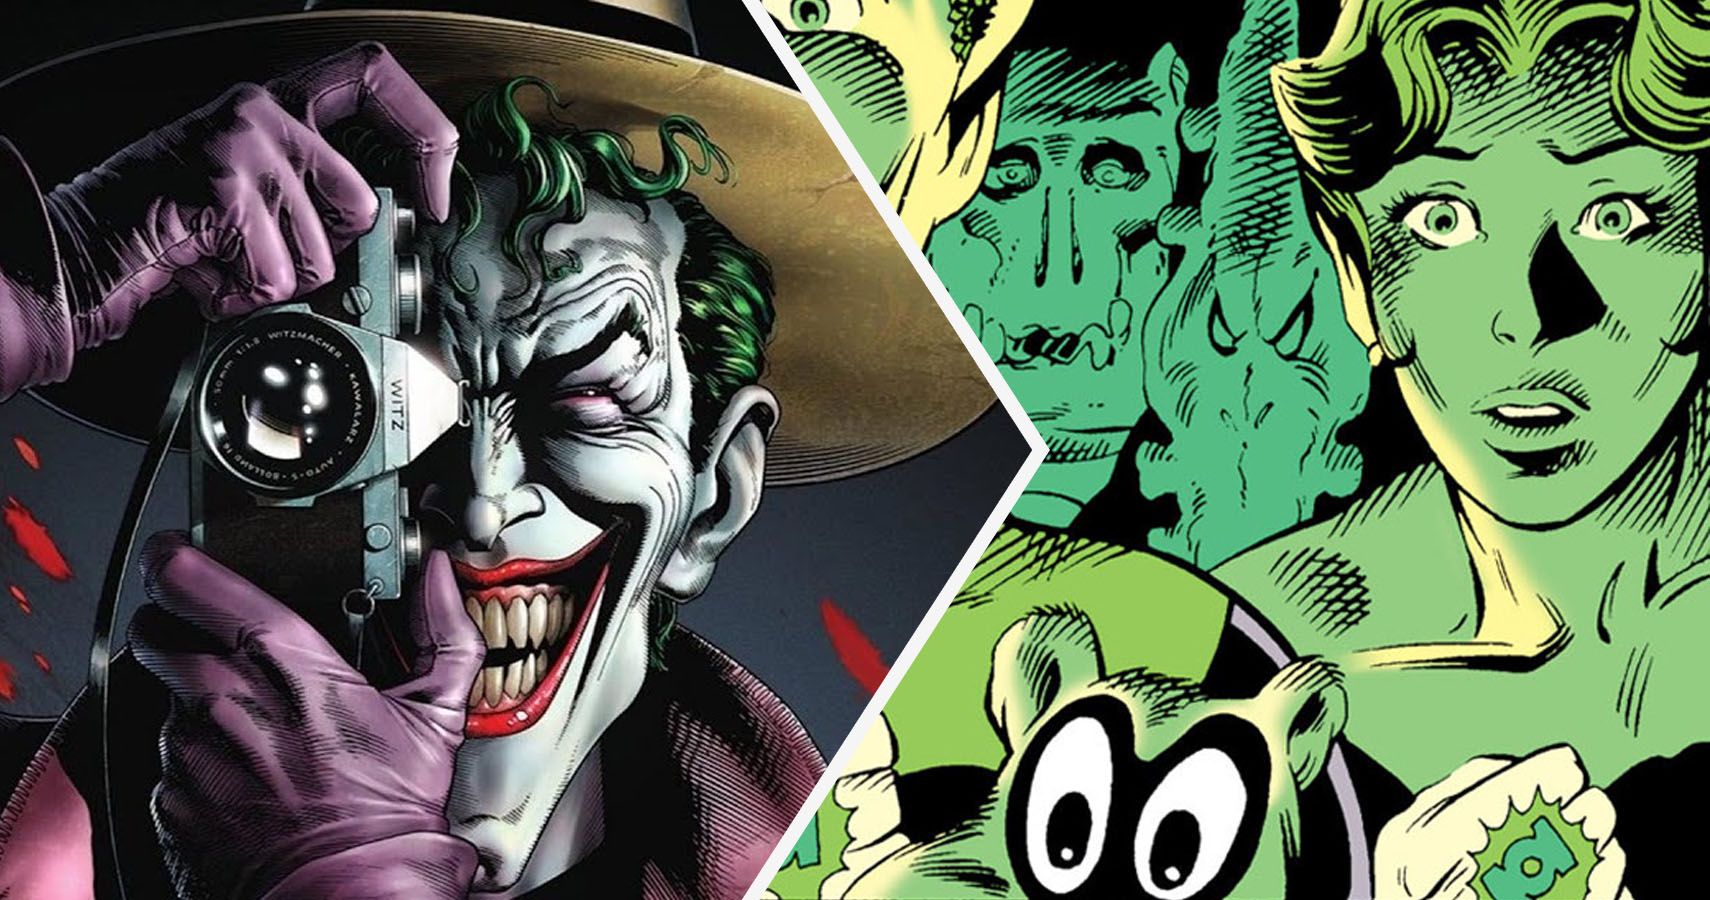 10 DC Storylines That Wouldnt Fly Today